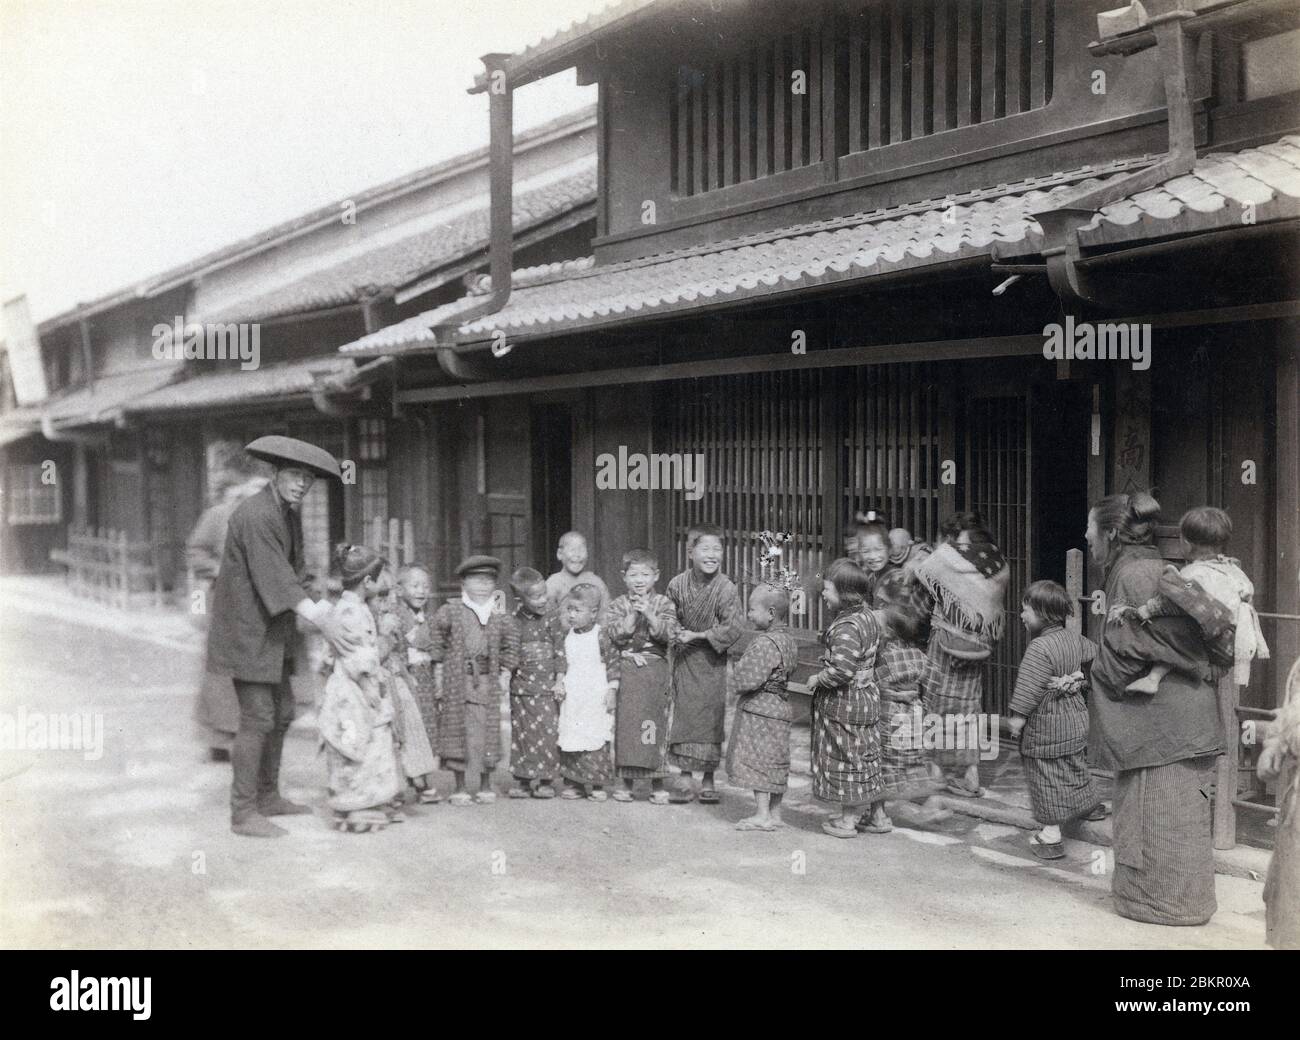 [ 1870s Japan - Japanese Children ] —   Japanese children in kimono pose before a traditional house.  19th century vintage albumen photograph. Stock Photo